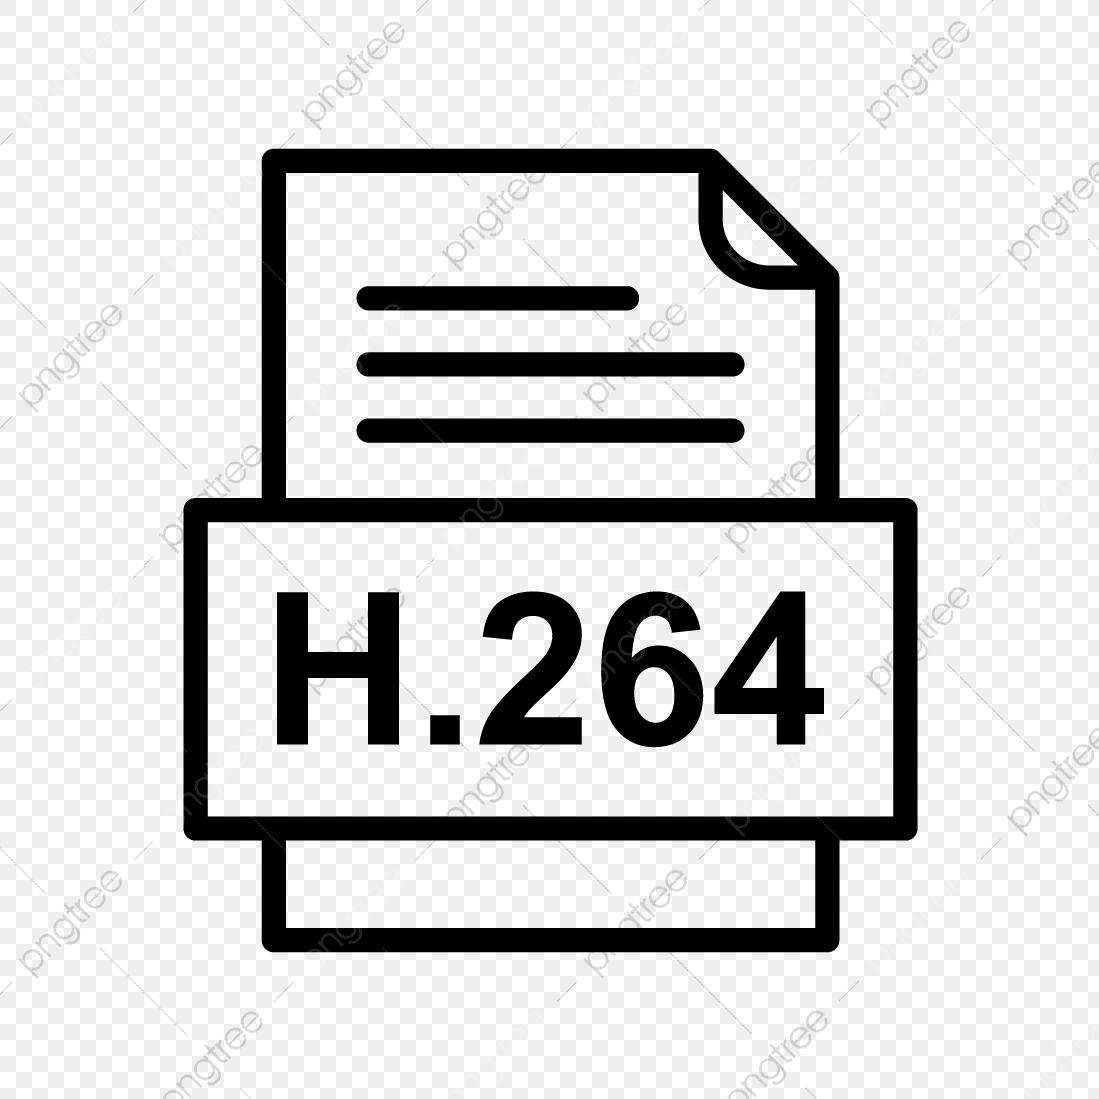 H.264 Logo - H.264 File Document Icon, H, Document PNG and Vector